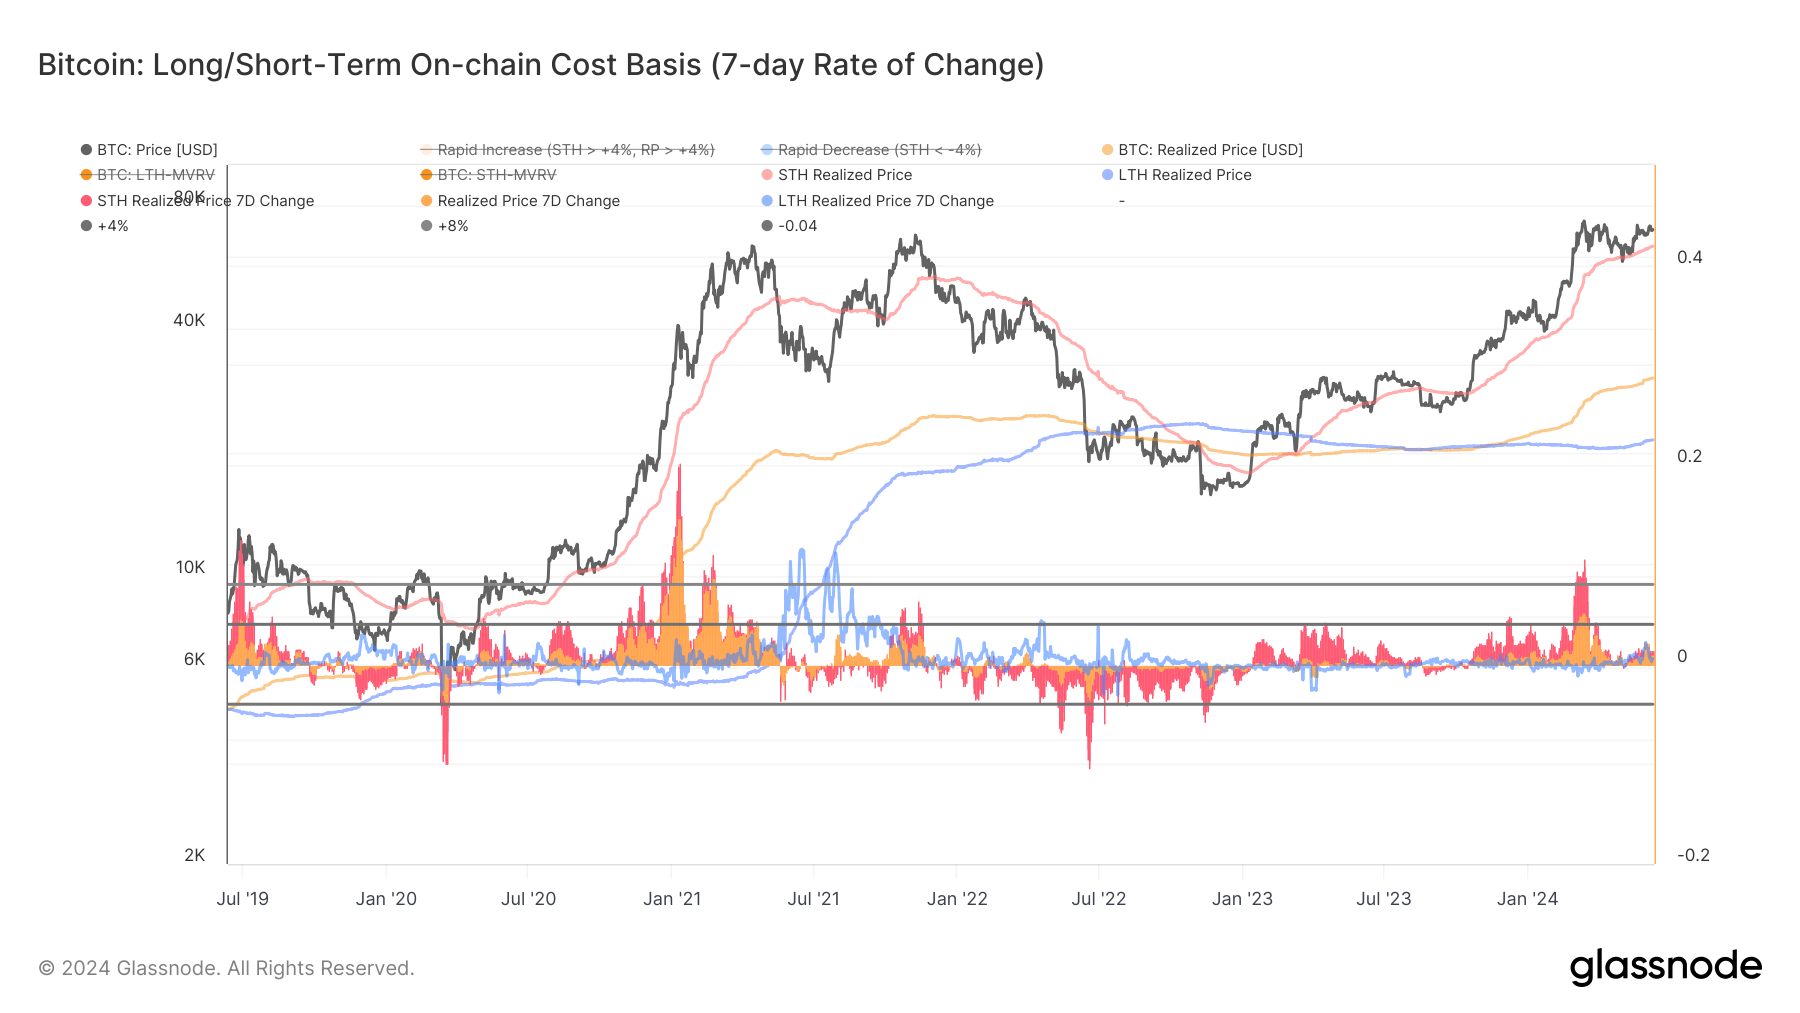 Bitcoin: Long/Short-Term On- Chain Cost Basis: (Source: Glassnode)